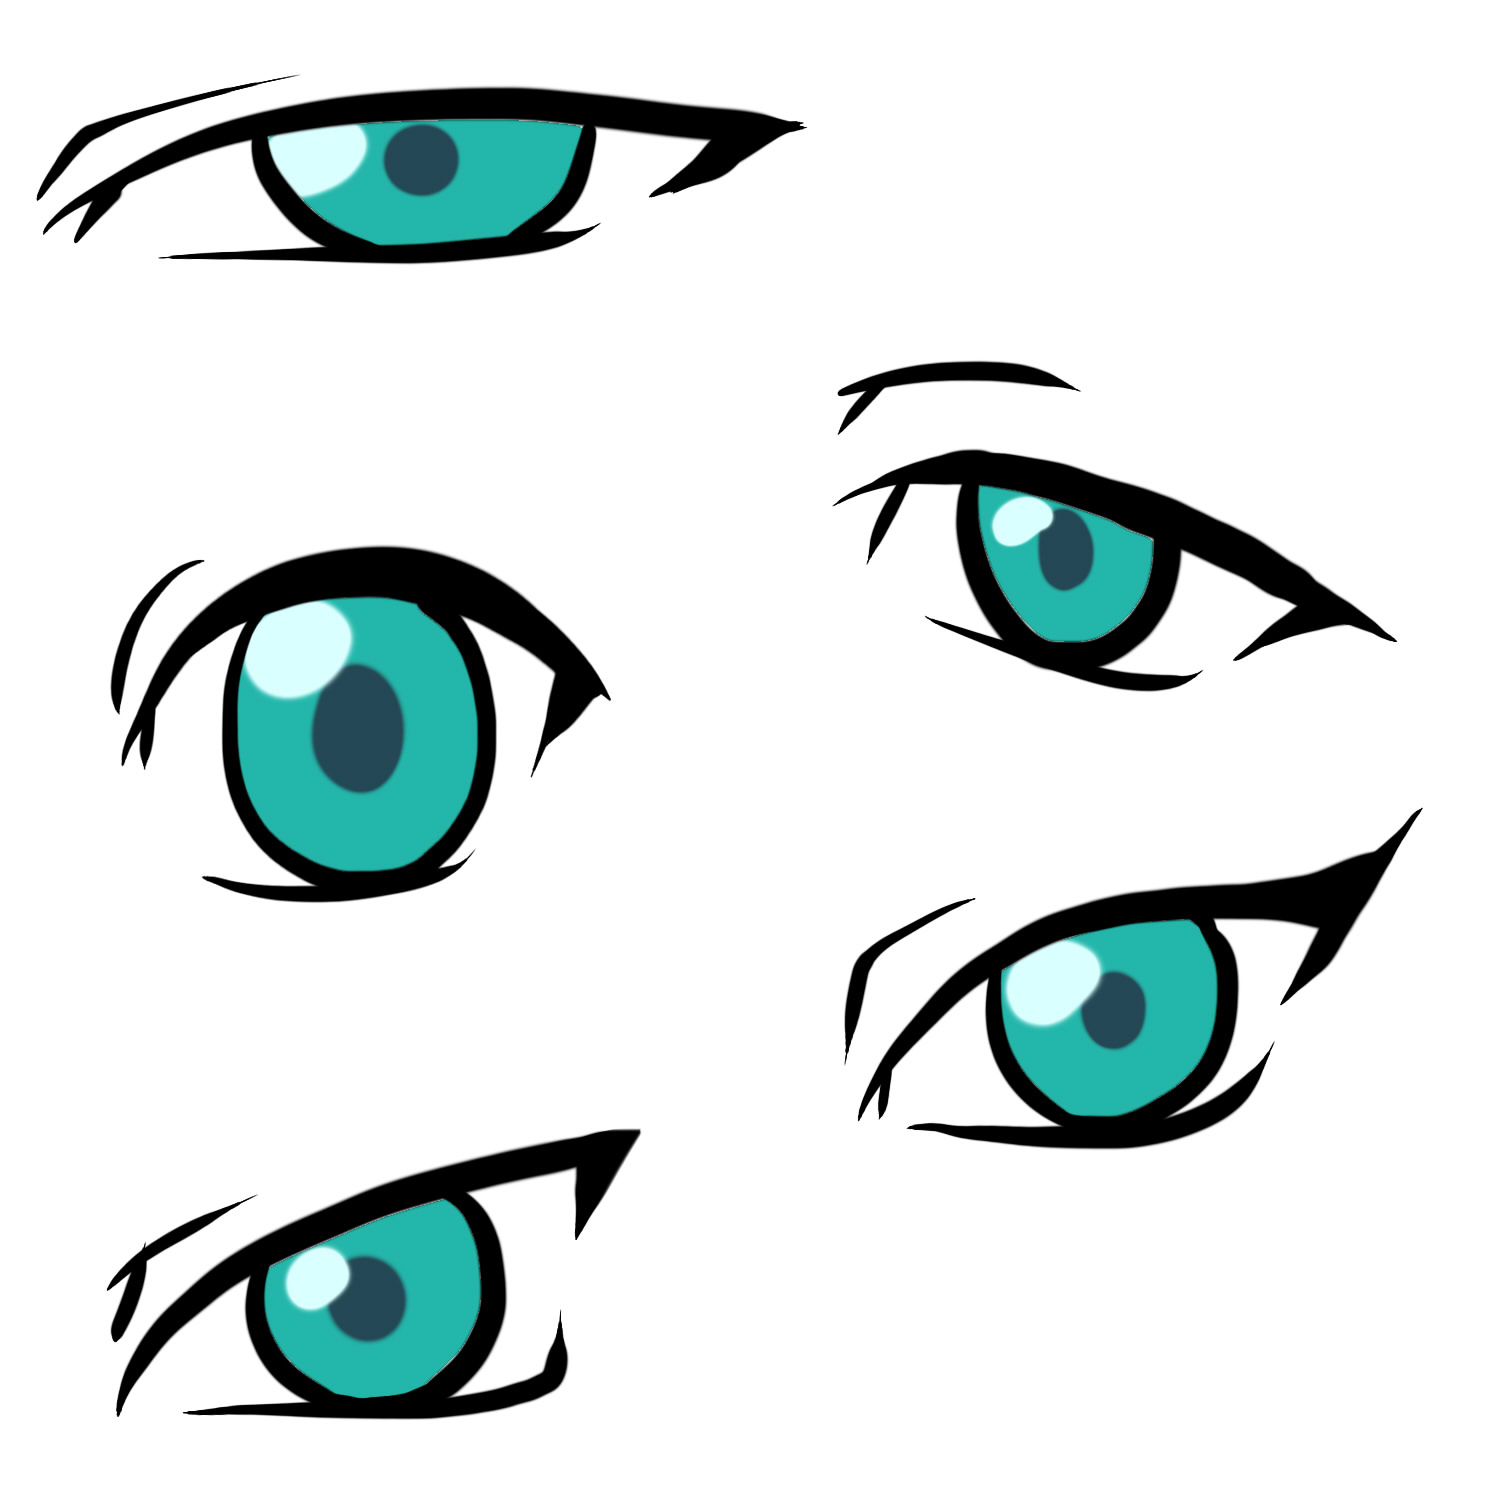 Drawing Realistic and Anime Style Eyes by Ecao  Make better art  CLIP  STUDIO TIPS